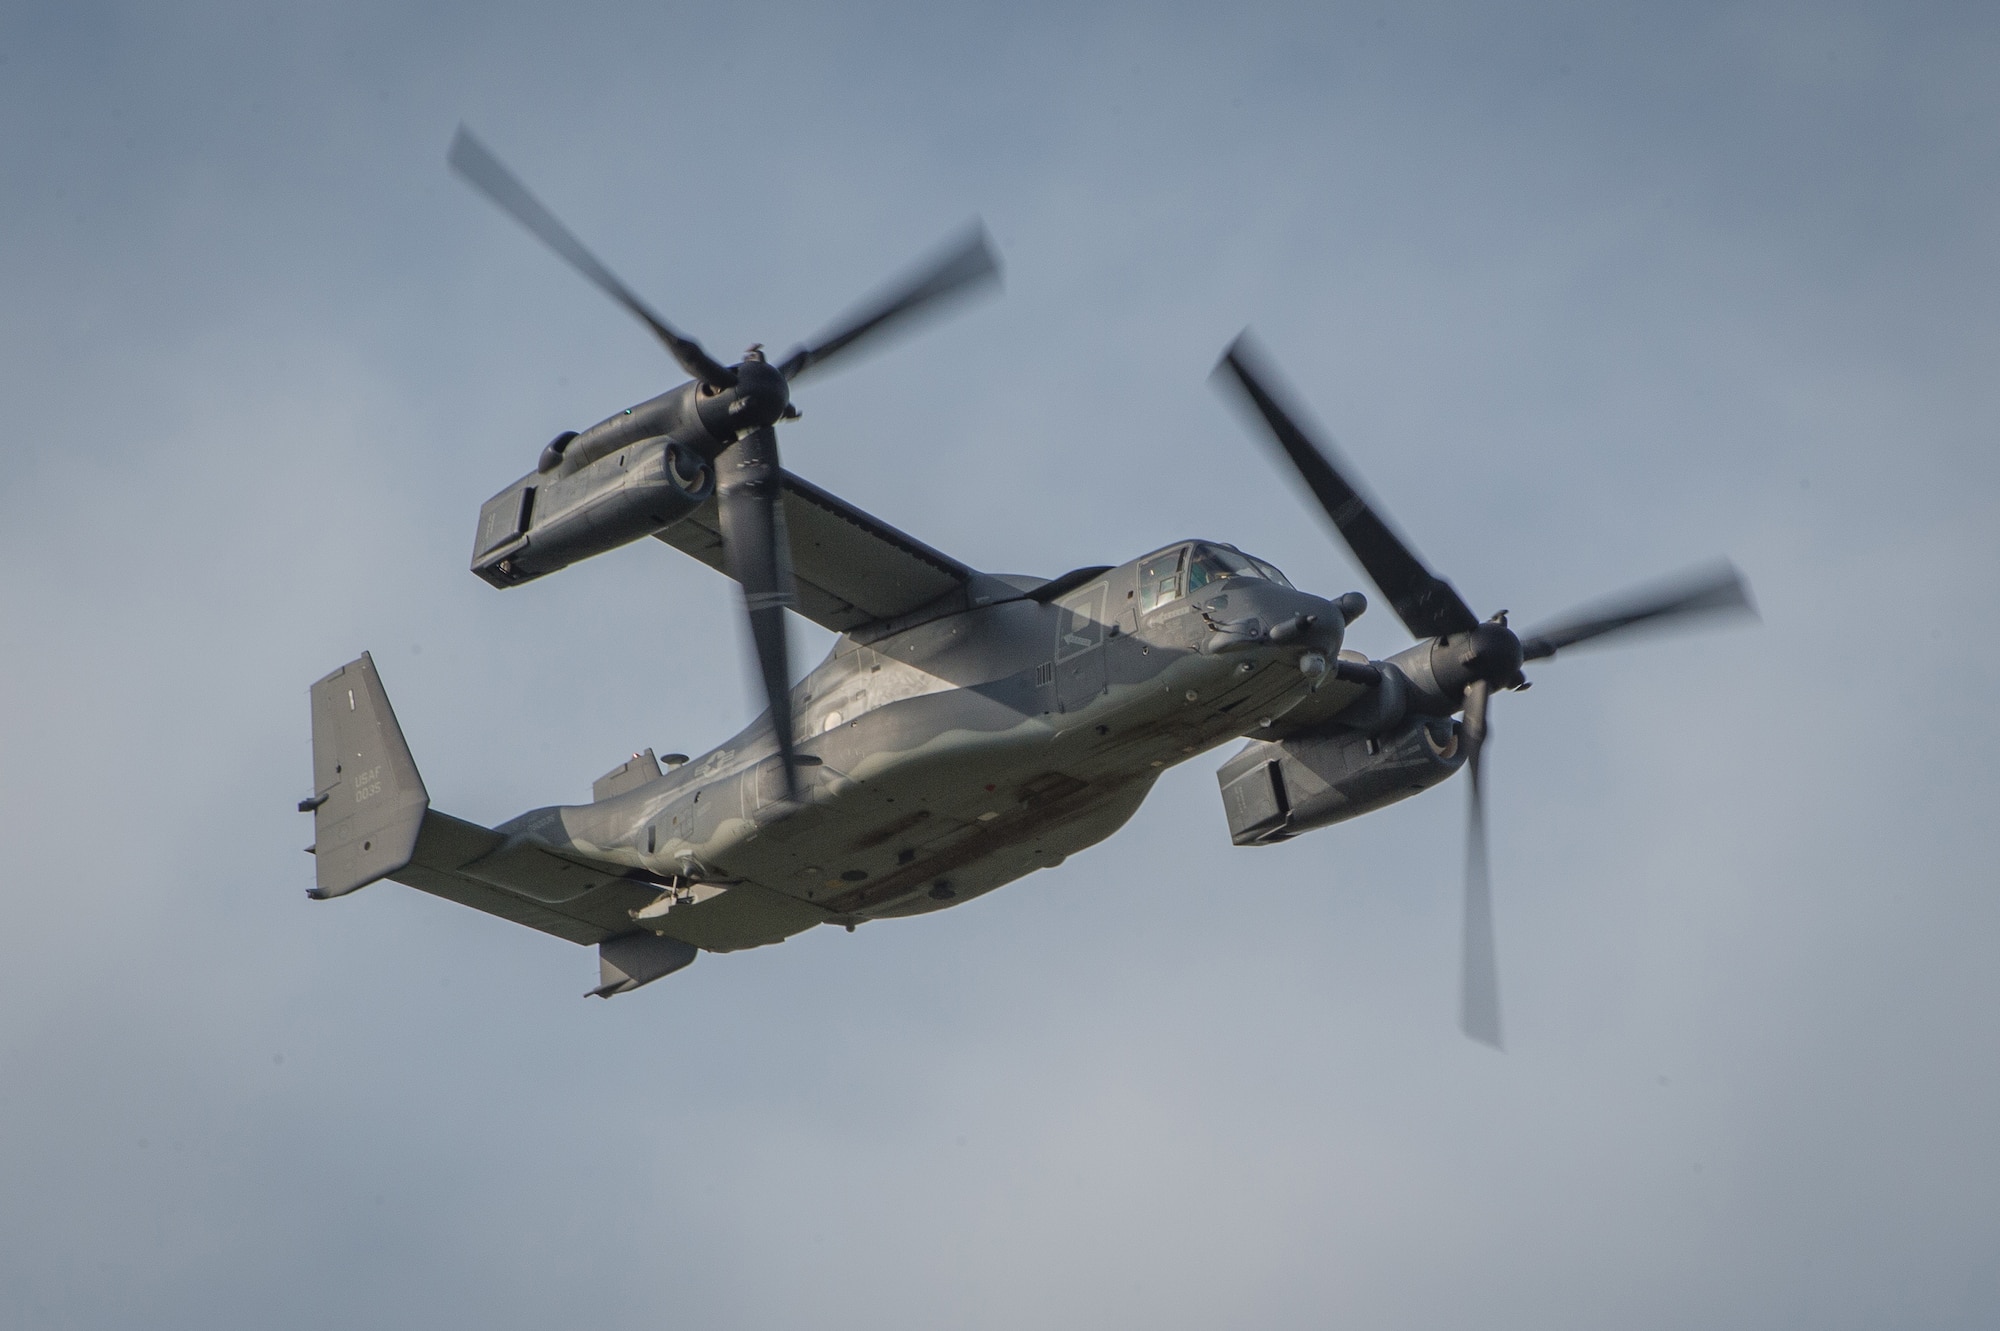 DAYTON, Ohio -- A CV-22 Osprey aircraft assigned to the 20th Special Operations Squadron at Cannon Air Force Base, N.M., provides a fly over for the public before the Green Hornet Dedication ceremony at the National Museum of the United States Air Force, Sept. 15, 2016. The aircraft and crew landed at the museum in tribute to the Green Hornets. (U.S. Air Force photo by Jim Copes)